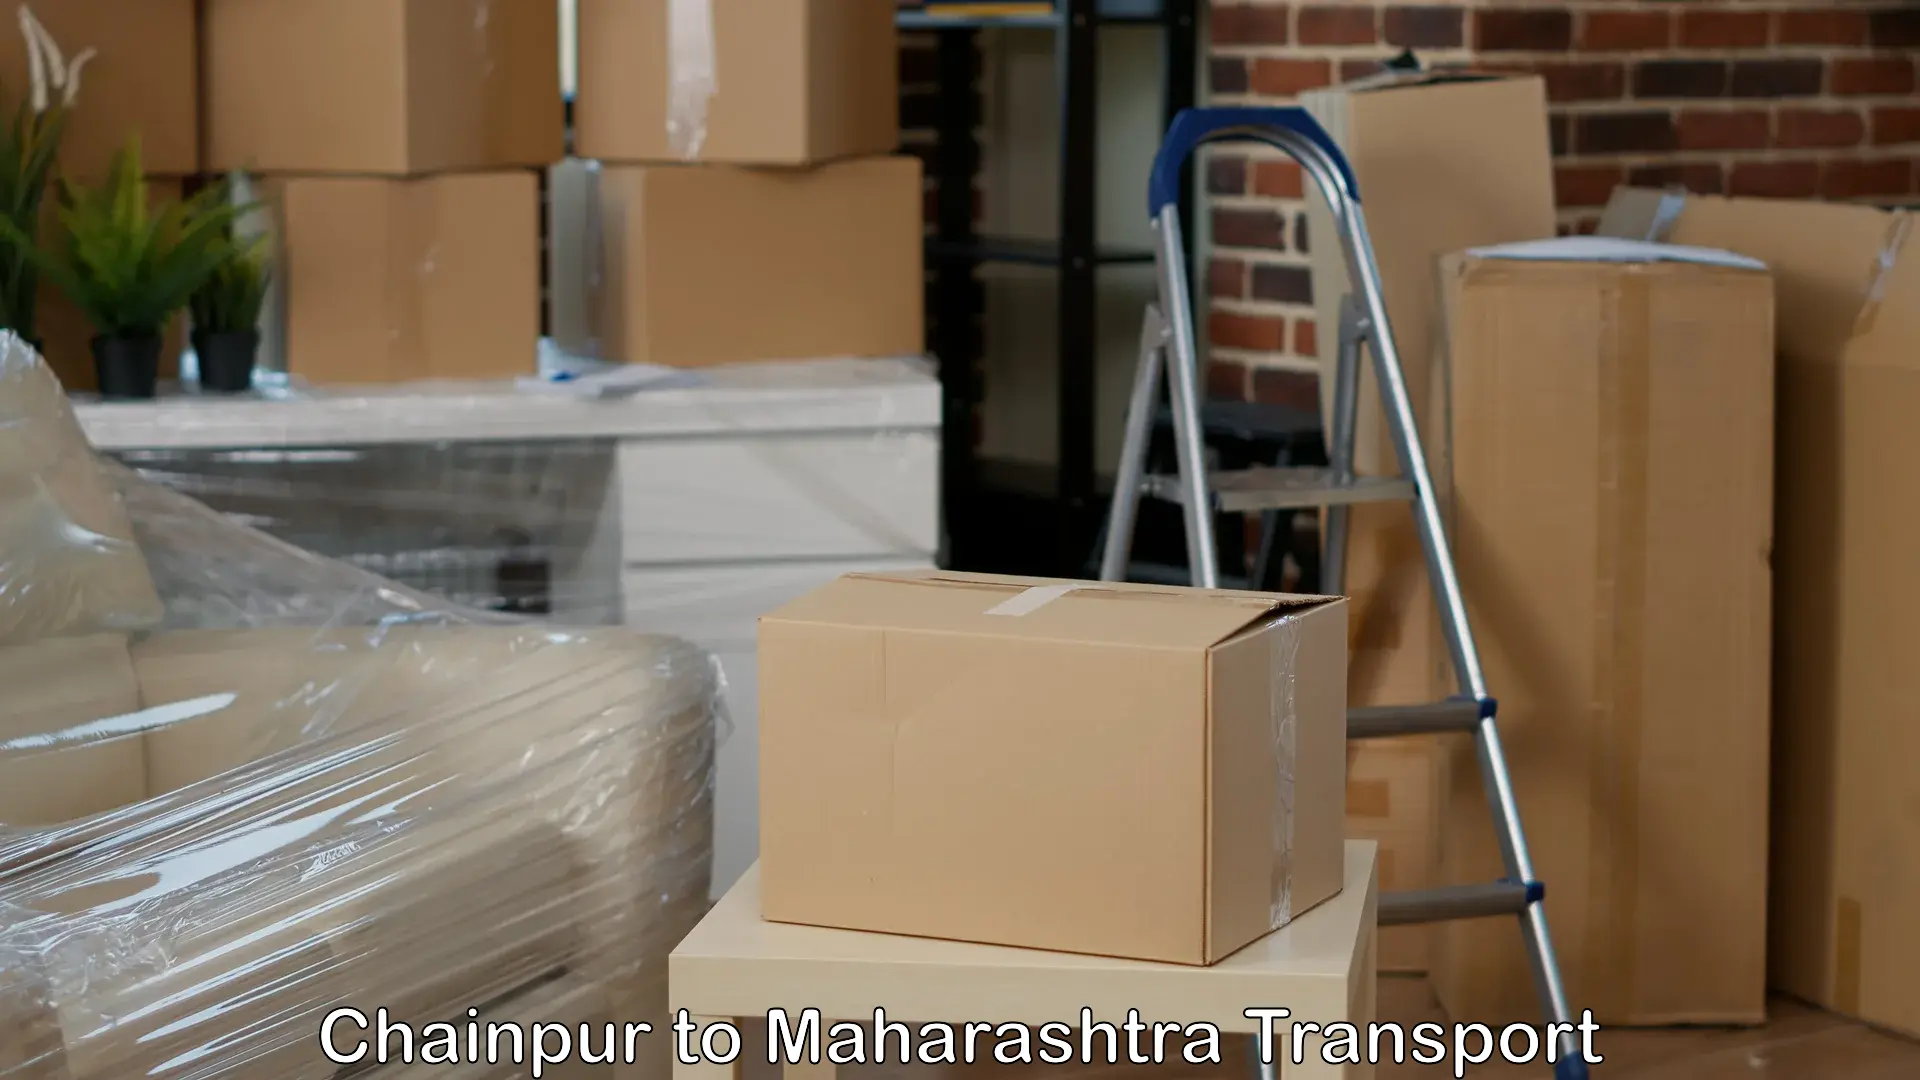 Container transportation services in Chainpur to Fardapur